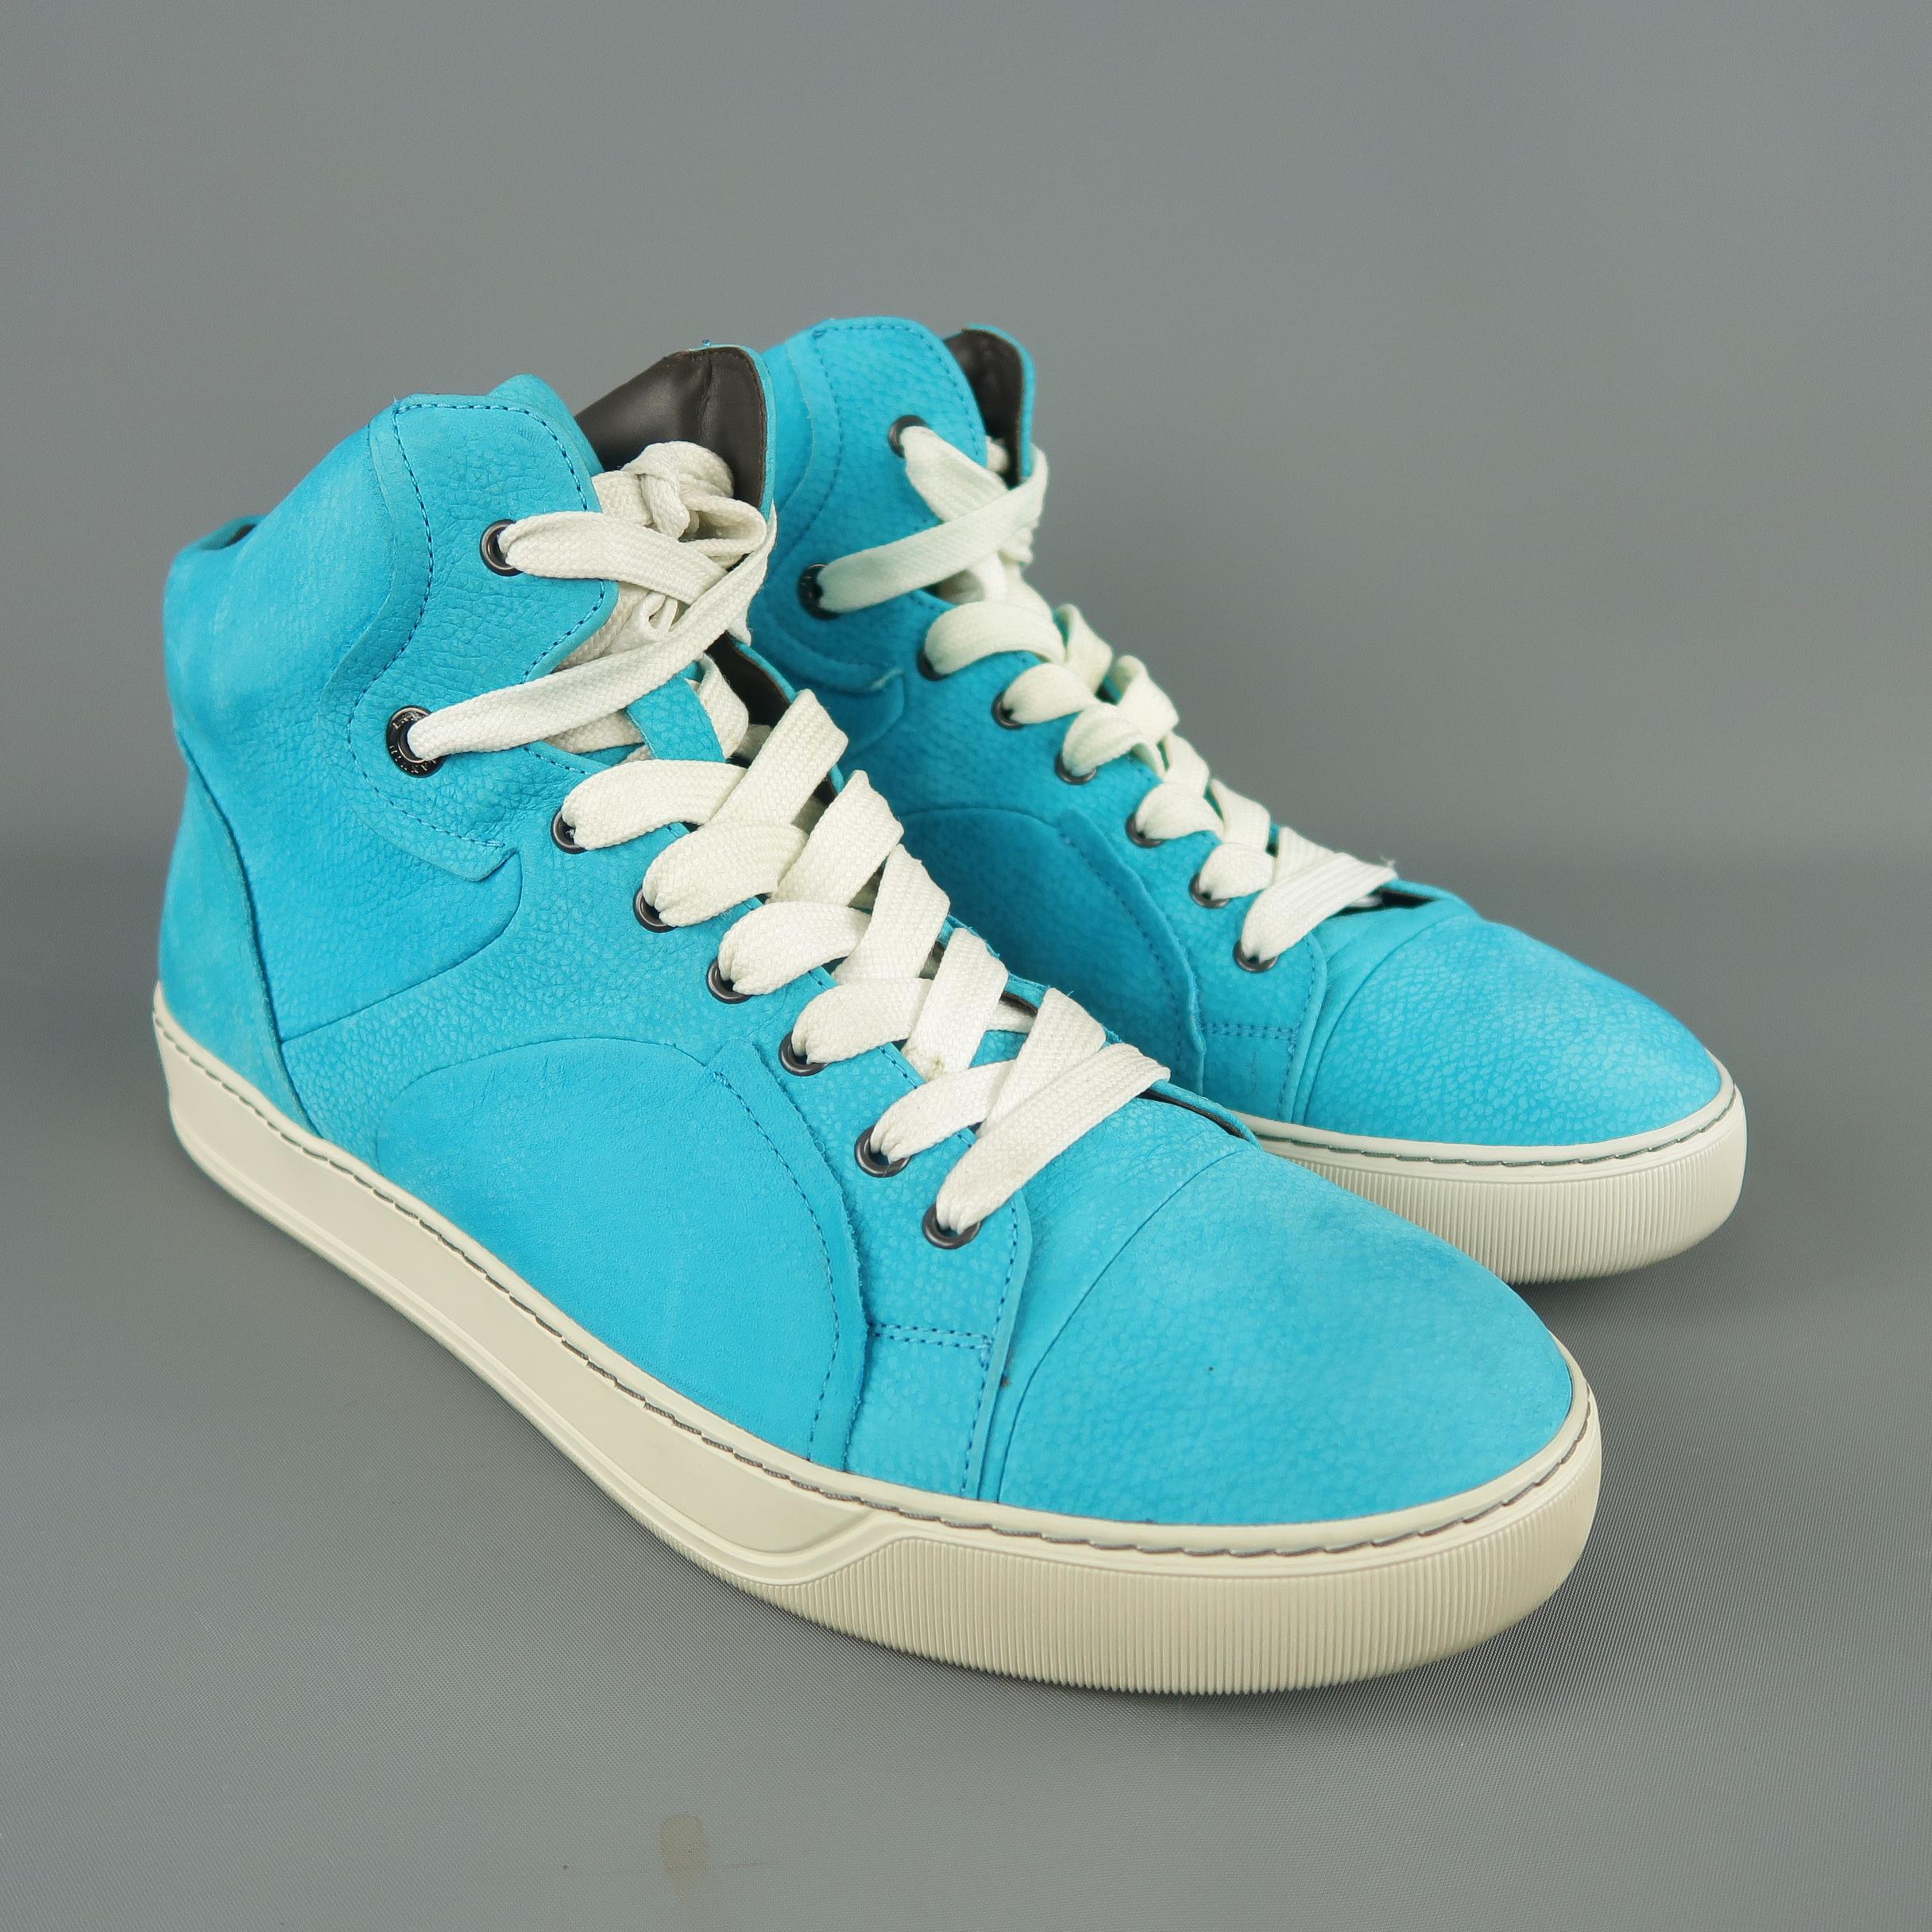 LANVIN high top sneakers come in aqua blue sueded nubuck leather with a white rubber sole and brown leather interior. Made in Italy.
 
Good Pre-Owned Condition.
Marked: UK 9
 
Measurements:
 
Length: 12 in.
Width: 4 in.
Height: 5 in.